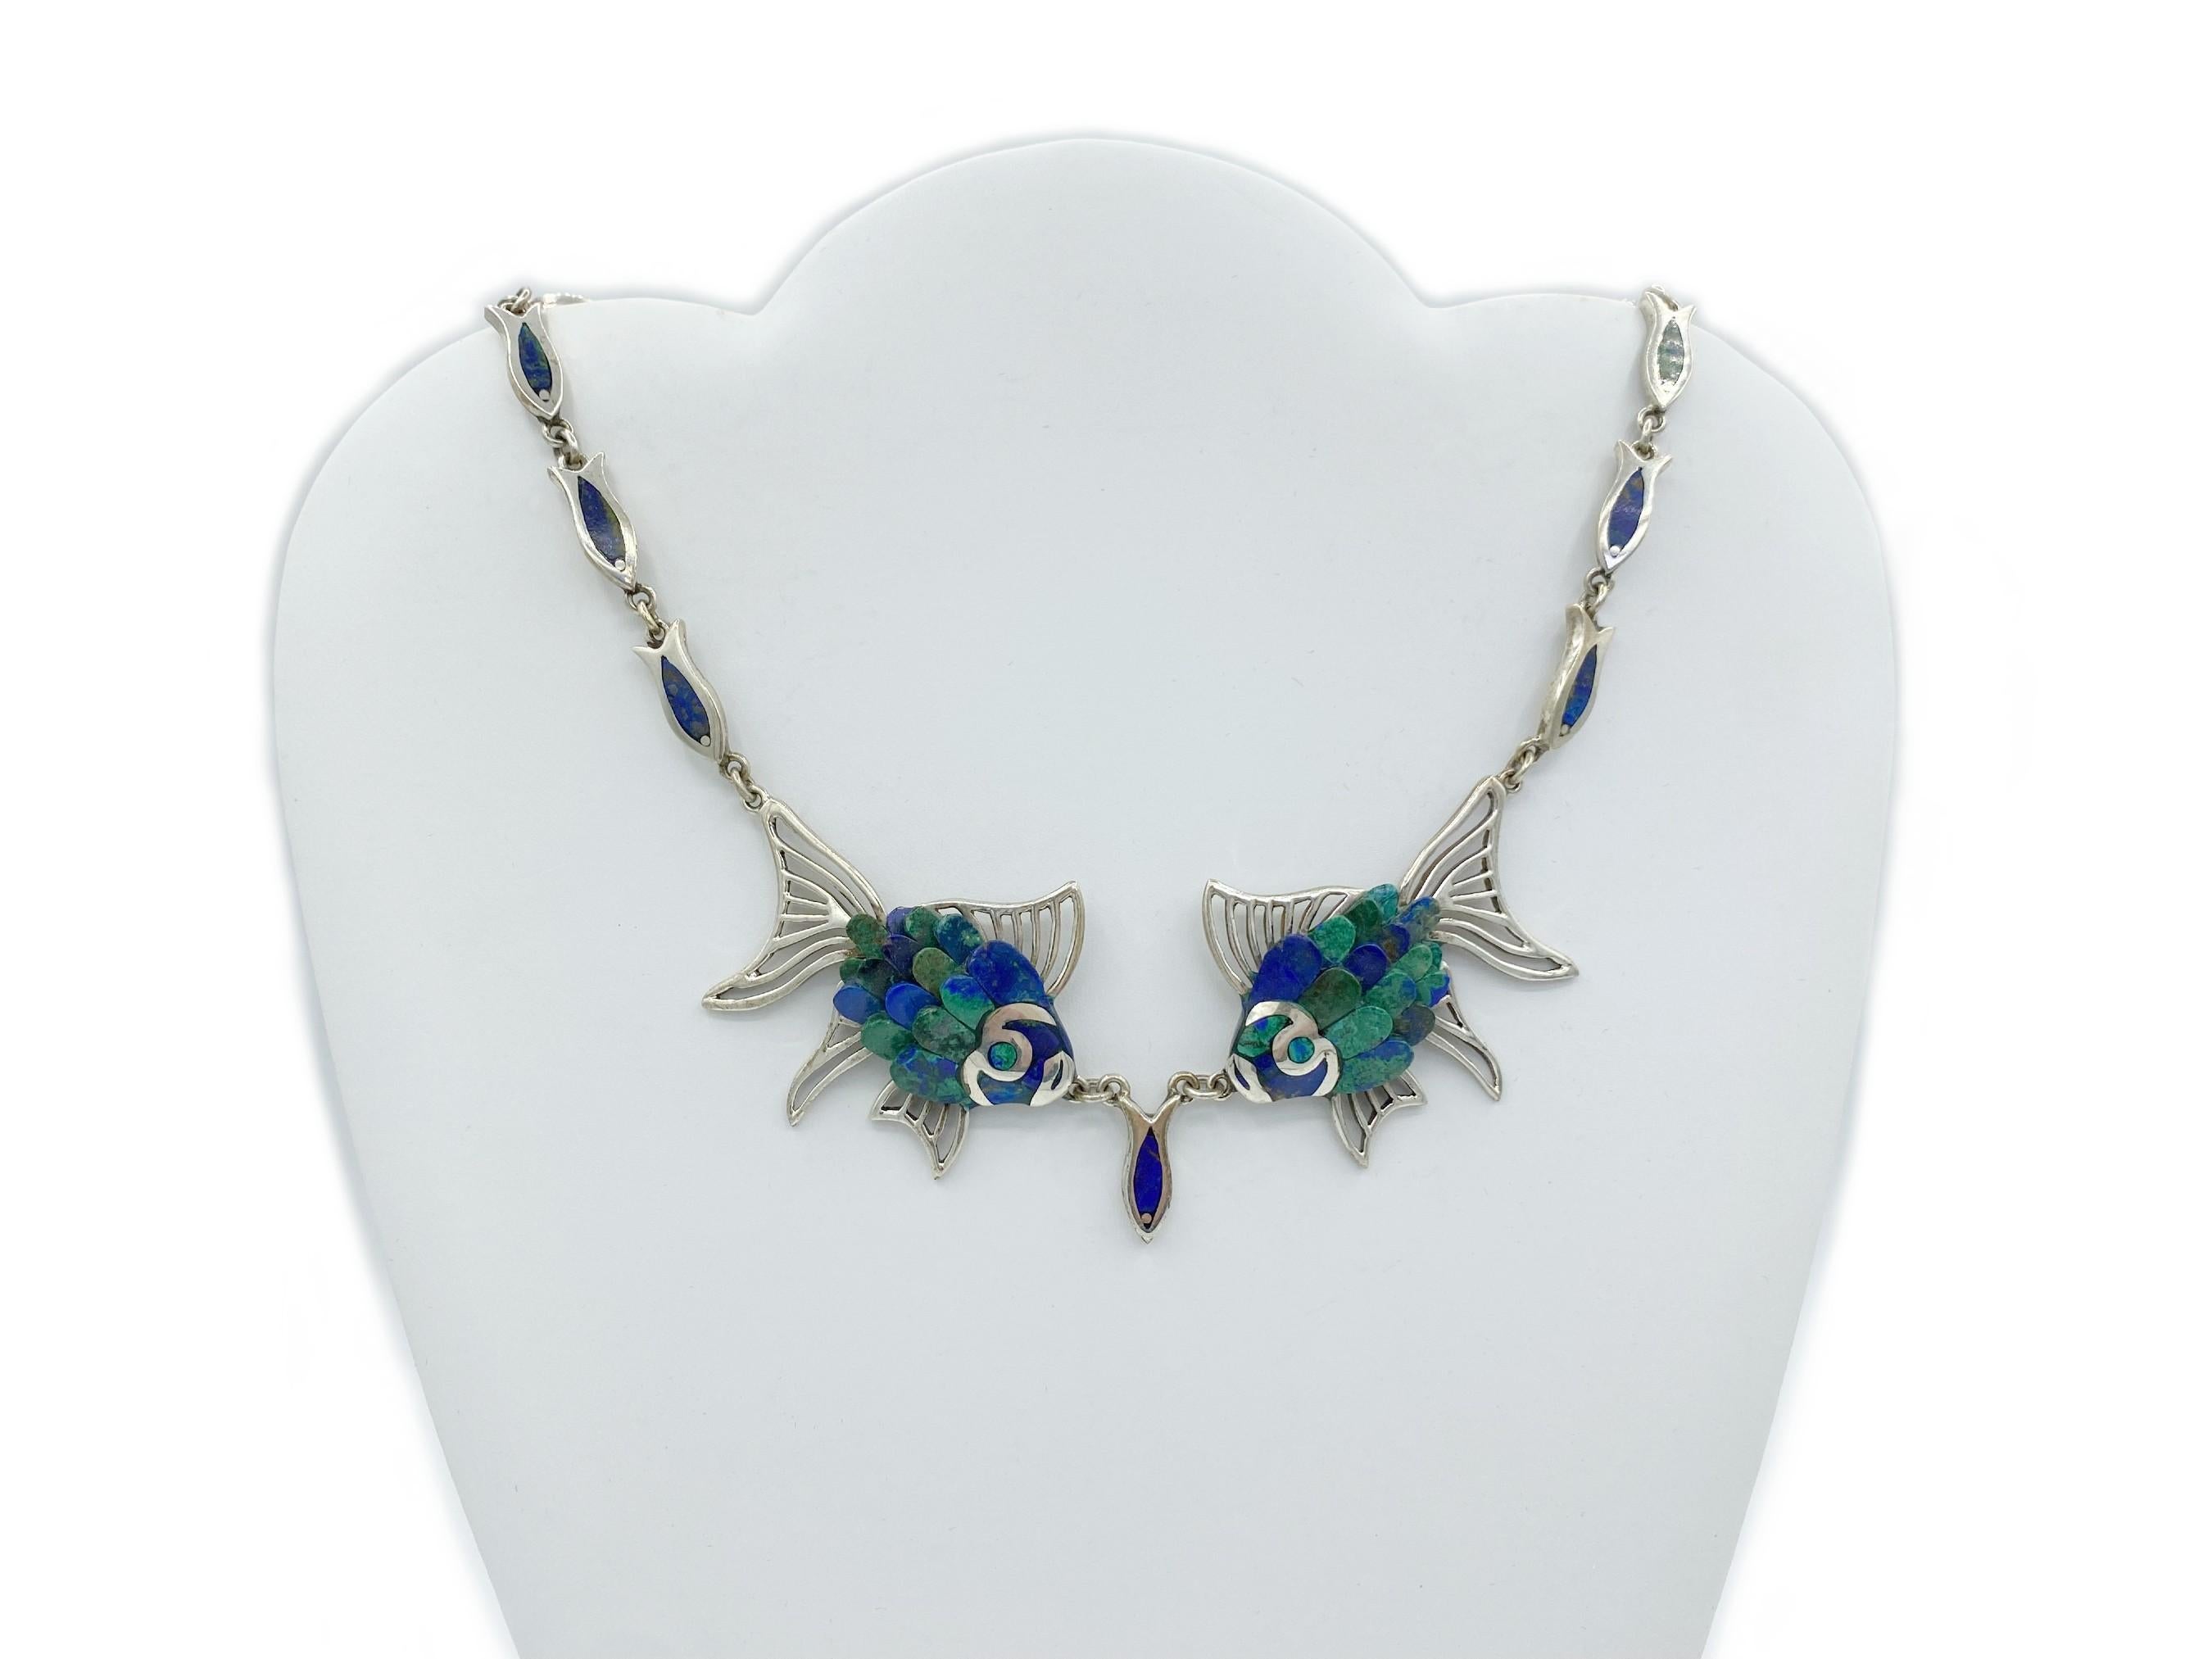 This unique, vintage Artisan necklace was handcrafted in Taxco, Mexico. Crafted of Sterling Silver, the eye-catching chain is comprised of linked fish-shaped panels of alternating inset blue azurite and green malachite, centered by two large fish